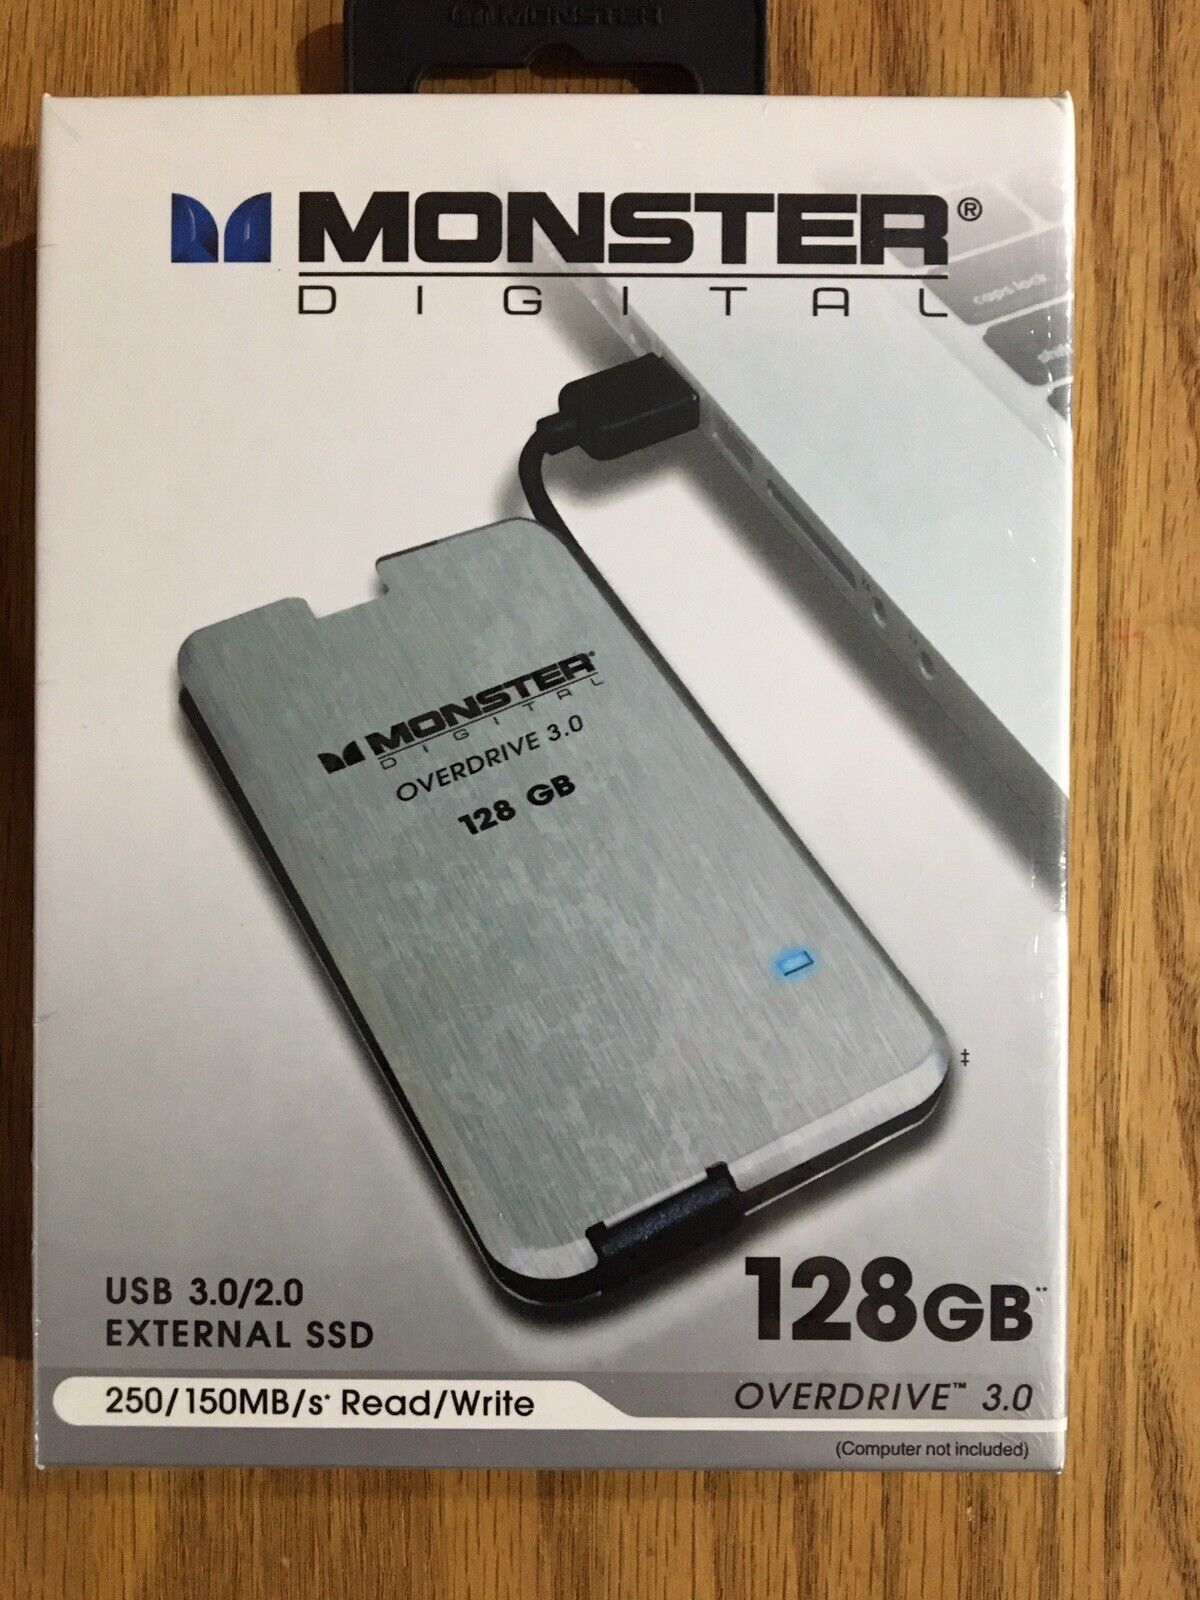 Monster Digital 128GB Overdrive Advanced Solid State Drive, 128GB USB 3.0+Cable